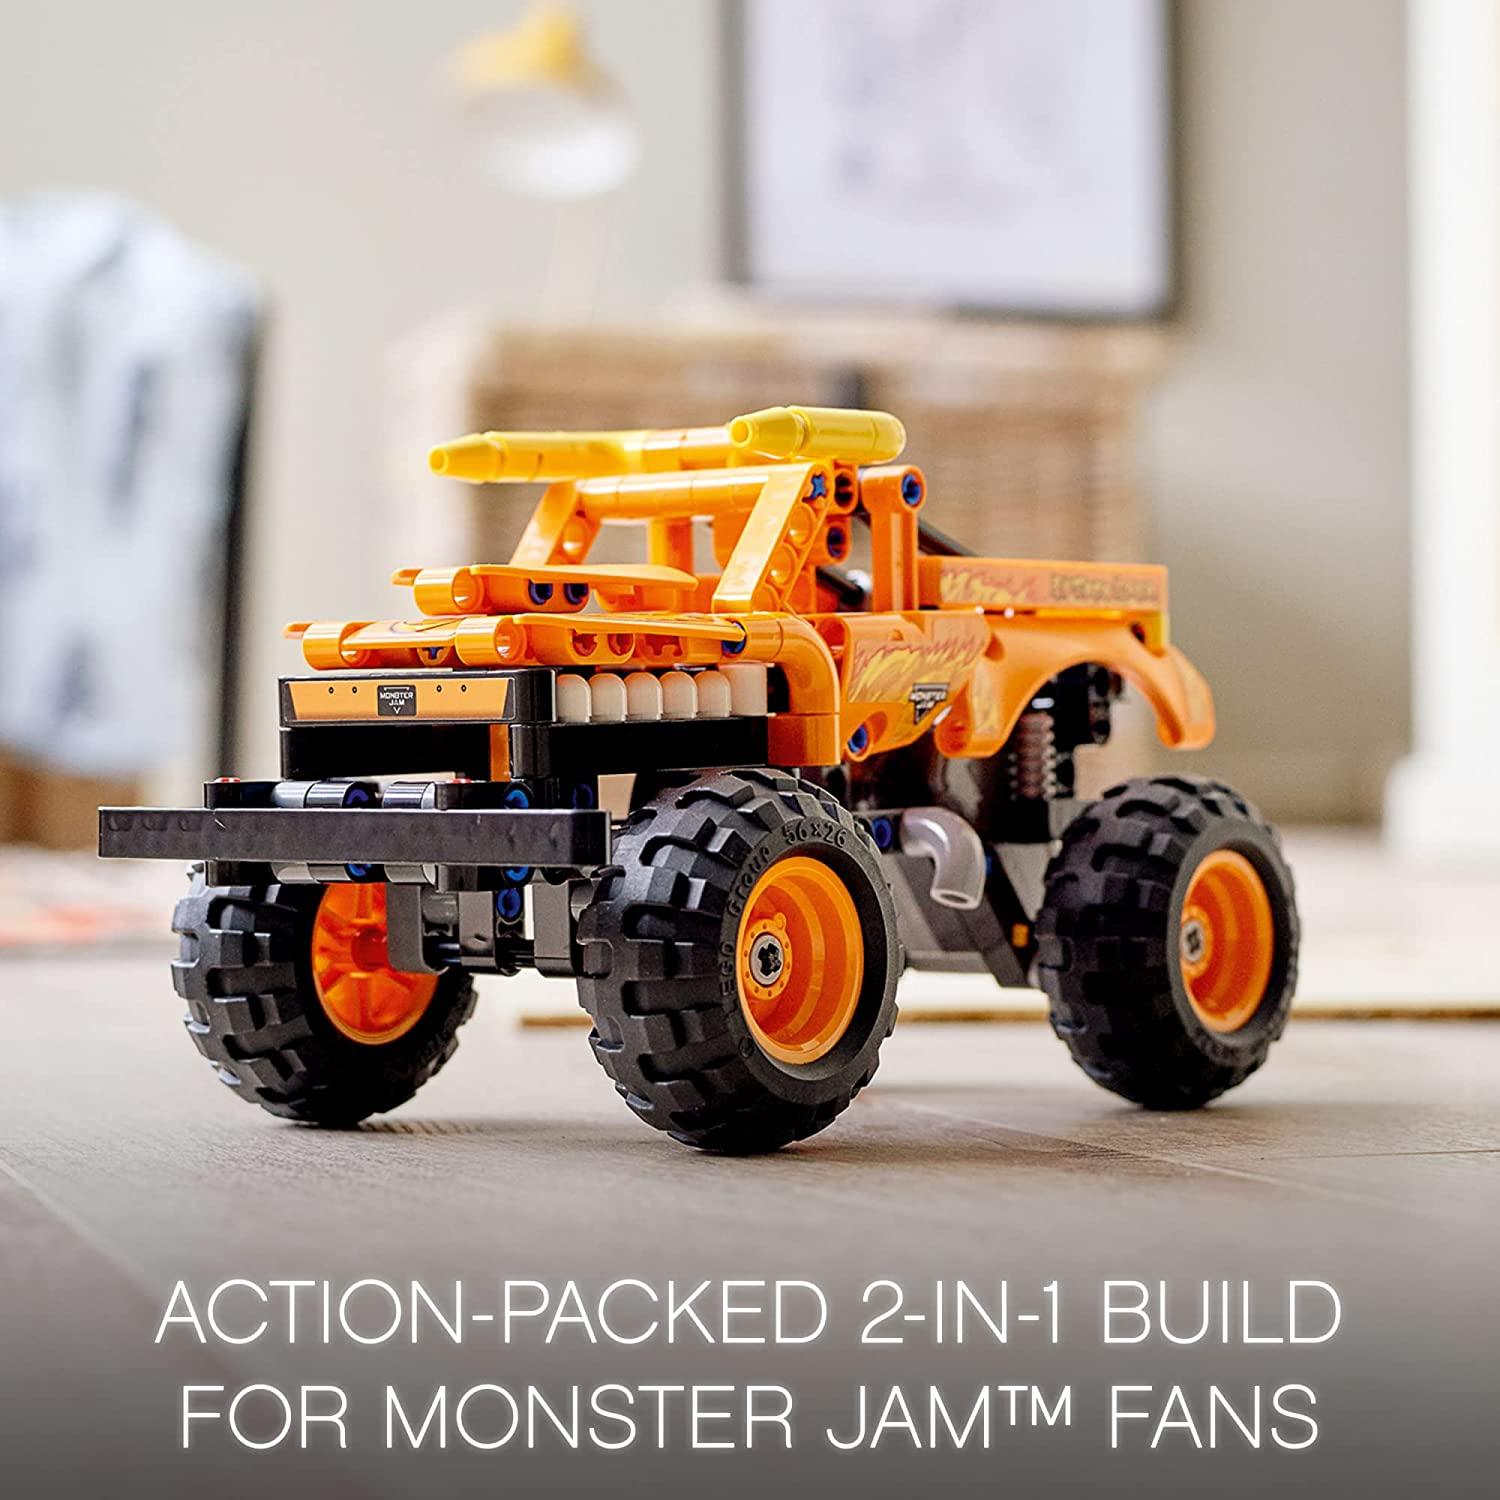 LEGO Technic Monster Jam El Toro Loco 42135 Model Building Kit; A 2-in-1 Pull-Back Toy for Kids Who Love Monster Trucks (247 Pieces) - BumbleToys - 8+ Years, 8-13 Years, Boys, Cars, LEGO, Monster Jam, OXE, Pre-Order, Technic